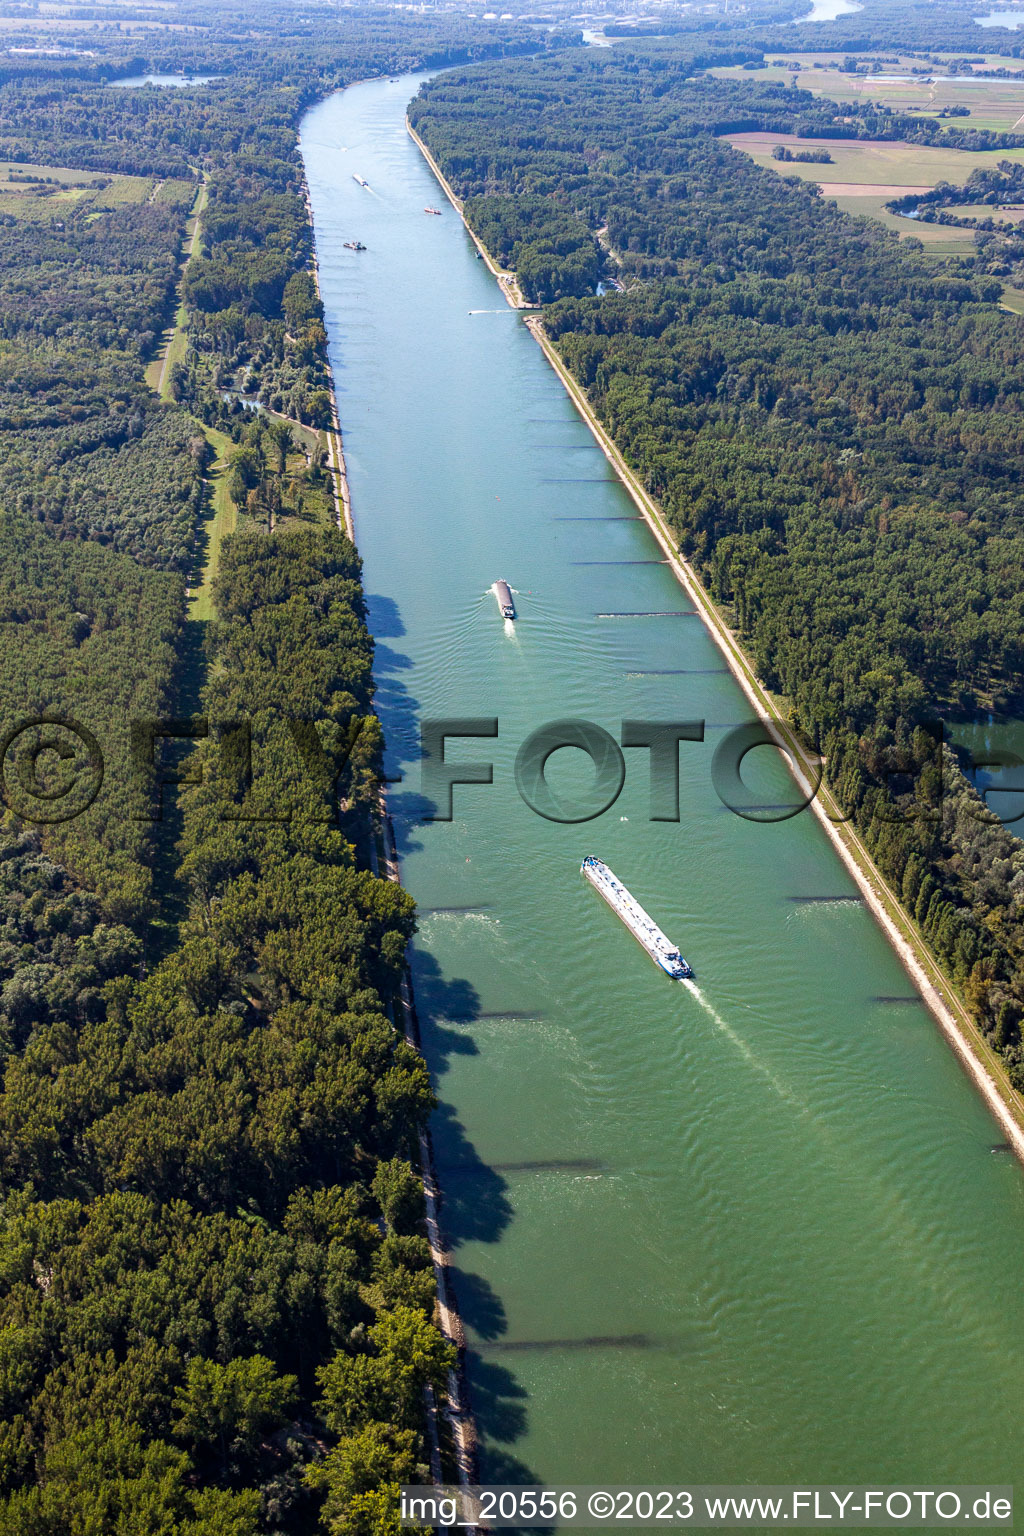 Aerial photograpy of Leimersheim in the state Rhineland-Palatinate, Germany